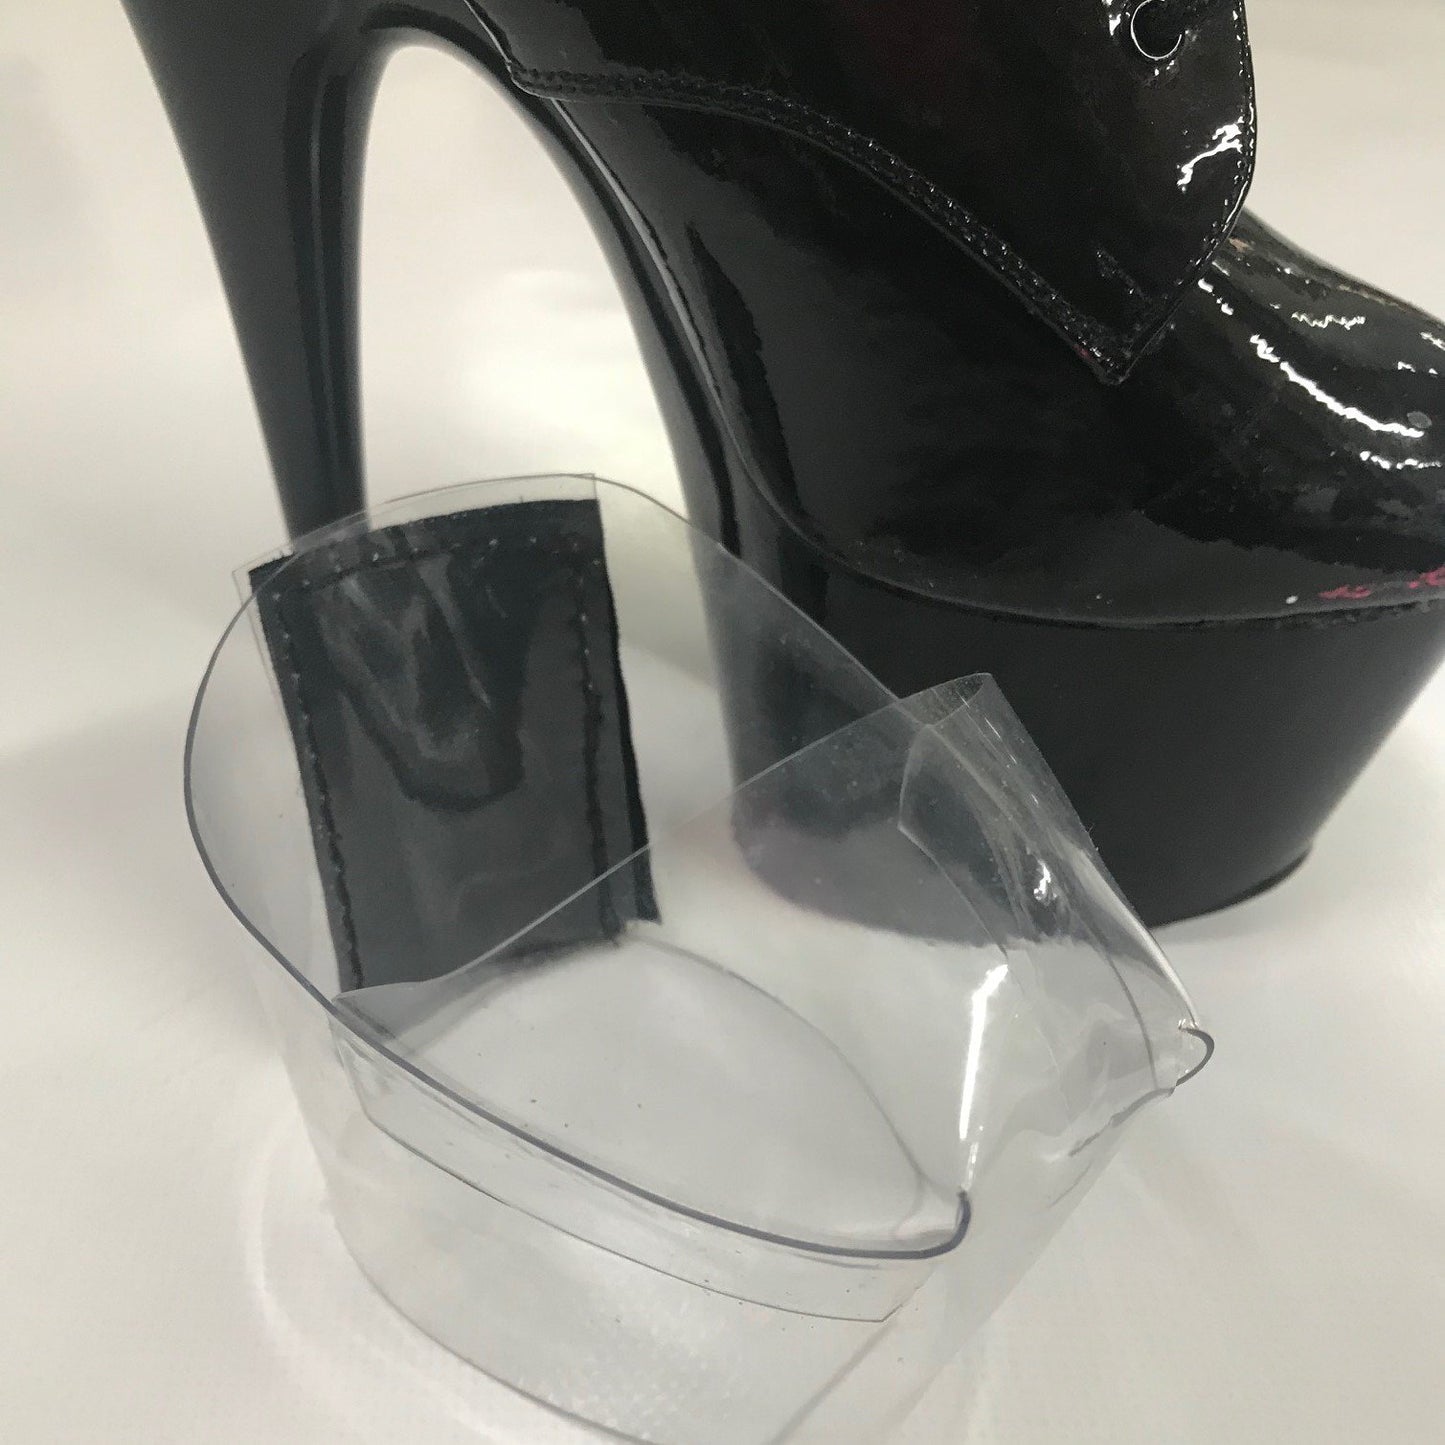 Clear Boot Cover Shoe Protectors - Black Fastener